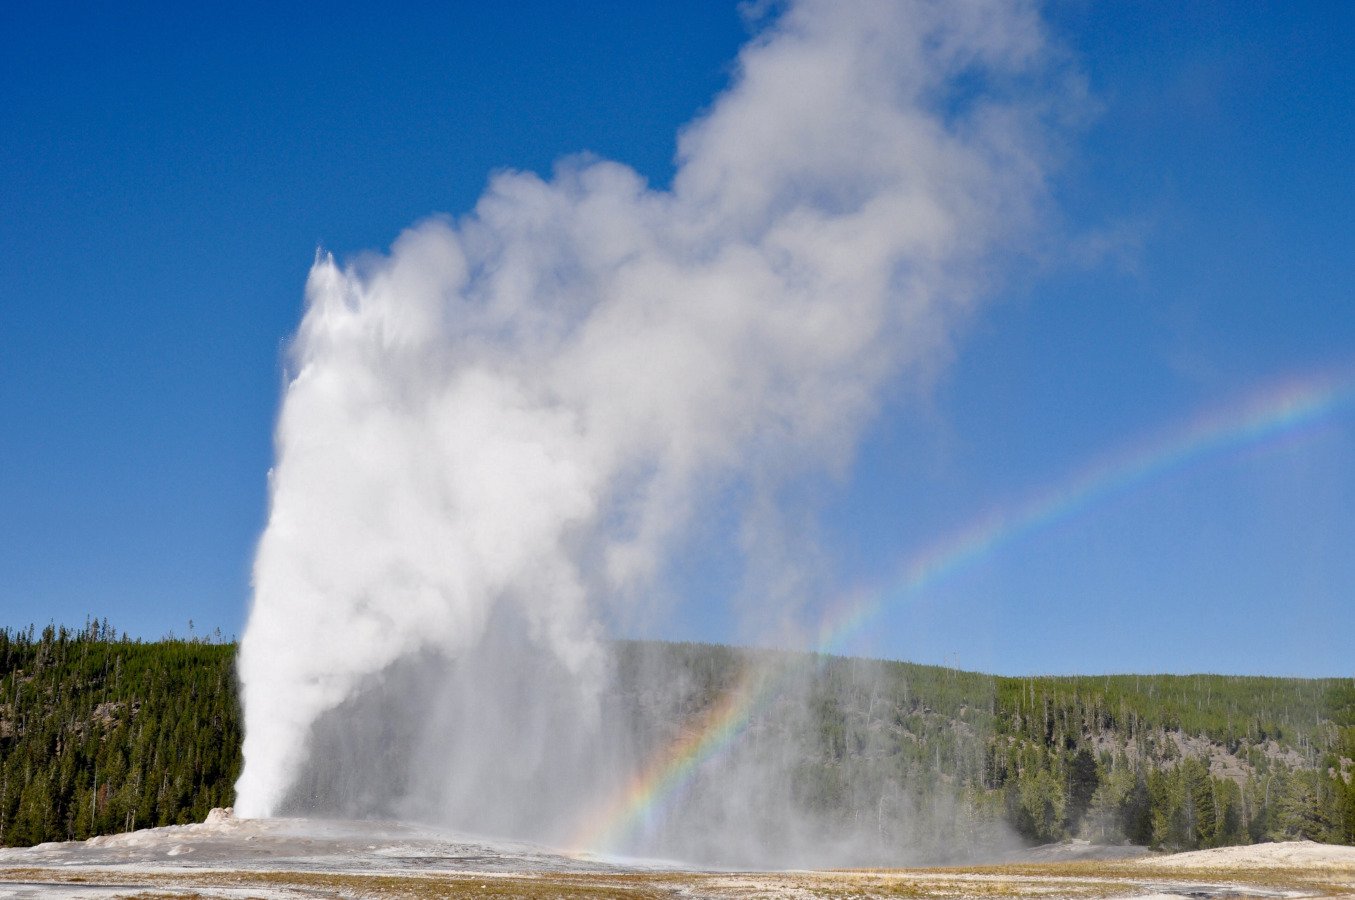 Most Famous attractions at Yellowstone